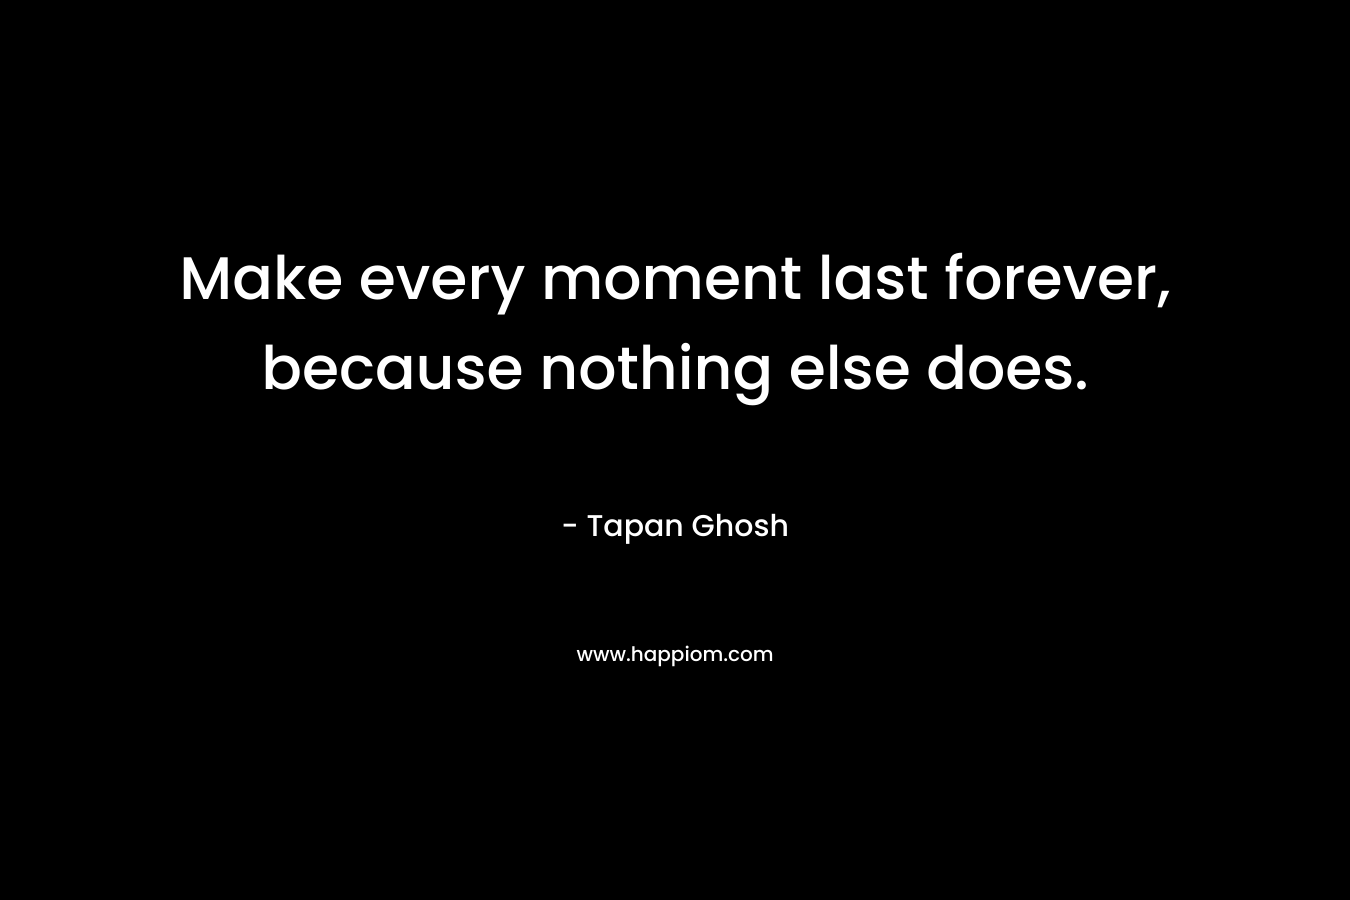 Make every moment last forever, because nothing else does. – Tapan Ghosh